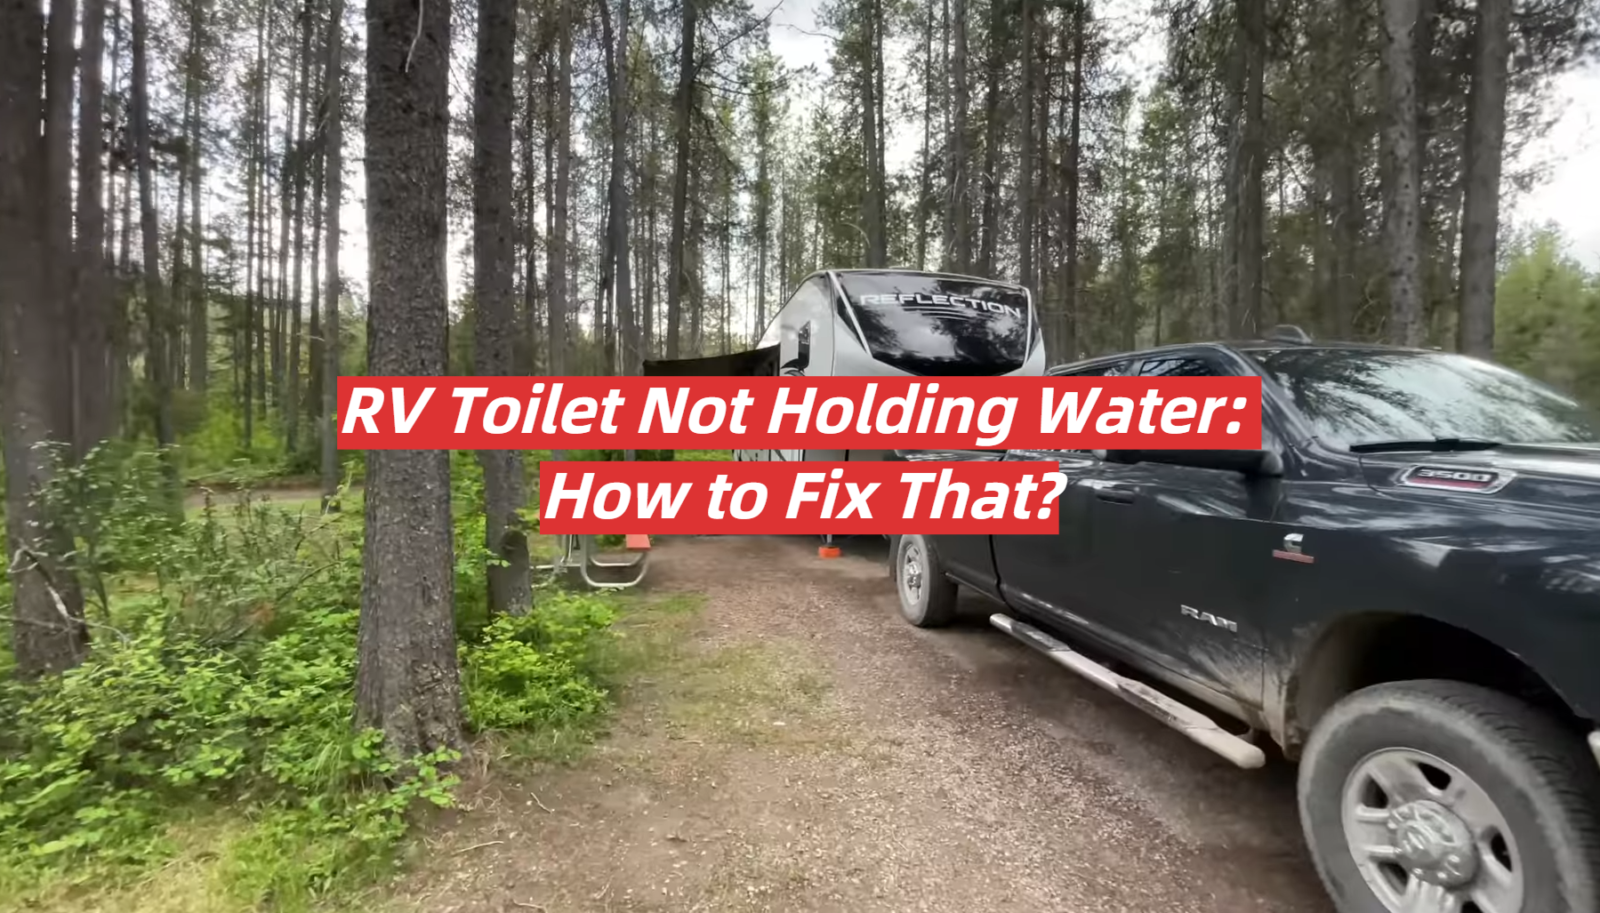 RV Toilet Not Holding Water: How to Fix That?